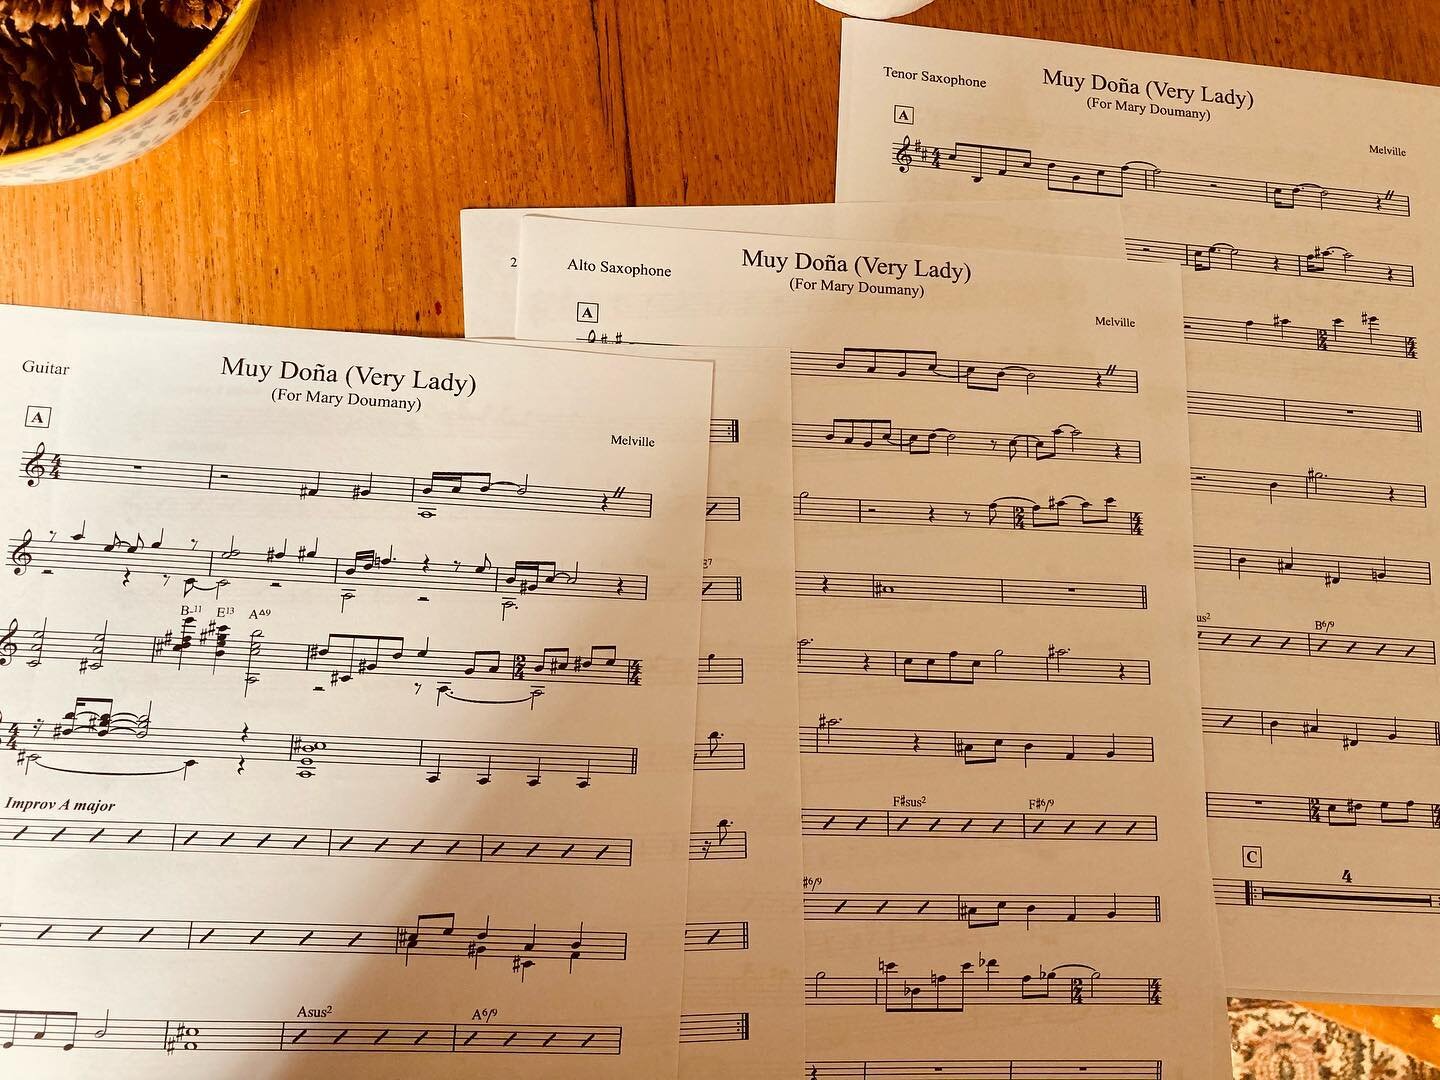 New music finished just in time for rehearsal tomorrow. A piece for my friend Mary Doumany. We&rsquo;ll be premiering a few new pieces for our upcoming show at @melbrecital, including Lagom, composed by @declan.postlethwaite.music. The weather is get